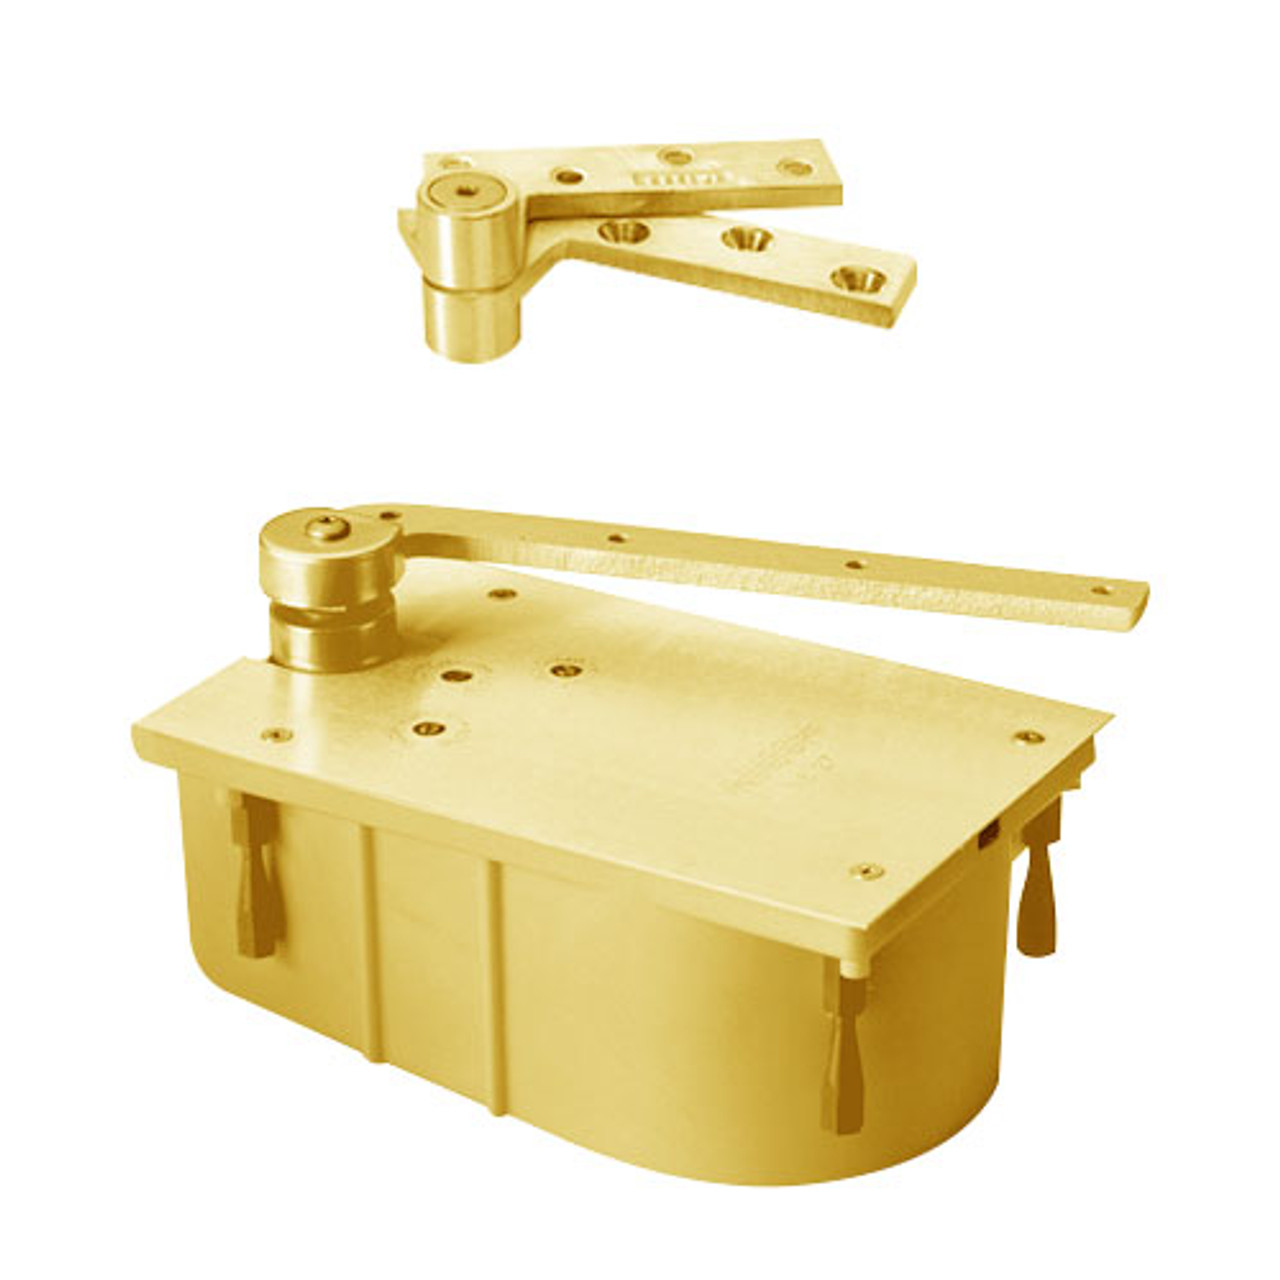 127-95N-LH-605 Rixson 127 Series Heavy Duty 3/4" Offset Hung Floor Closer in Bright Brass Finish